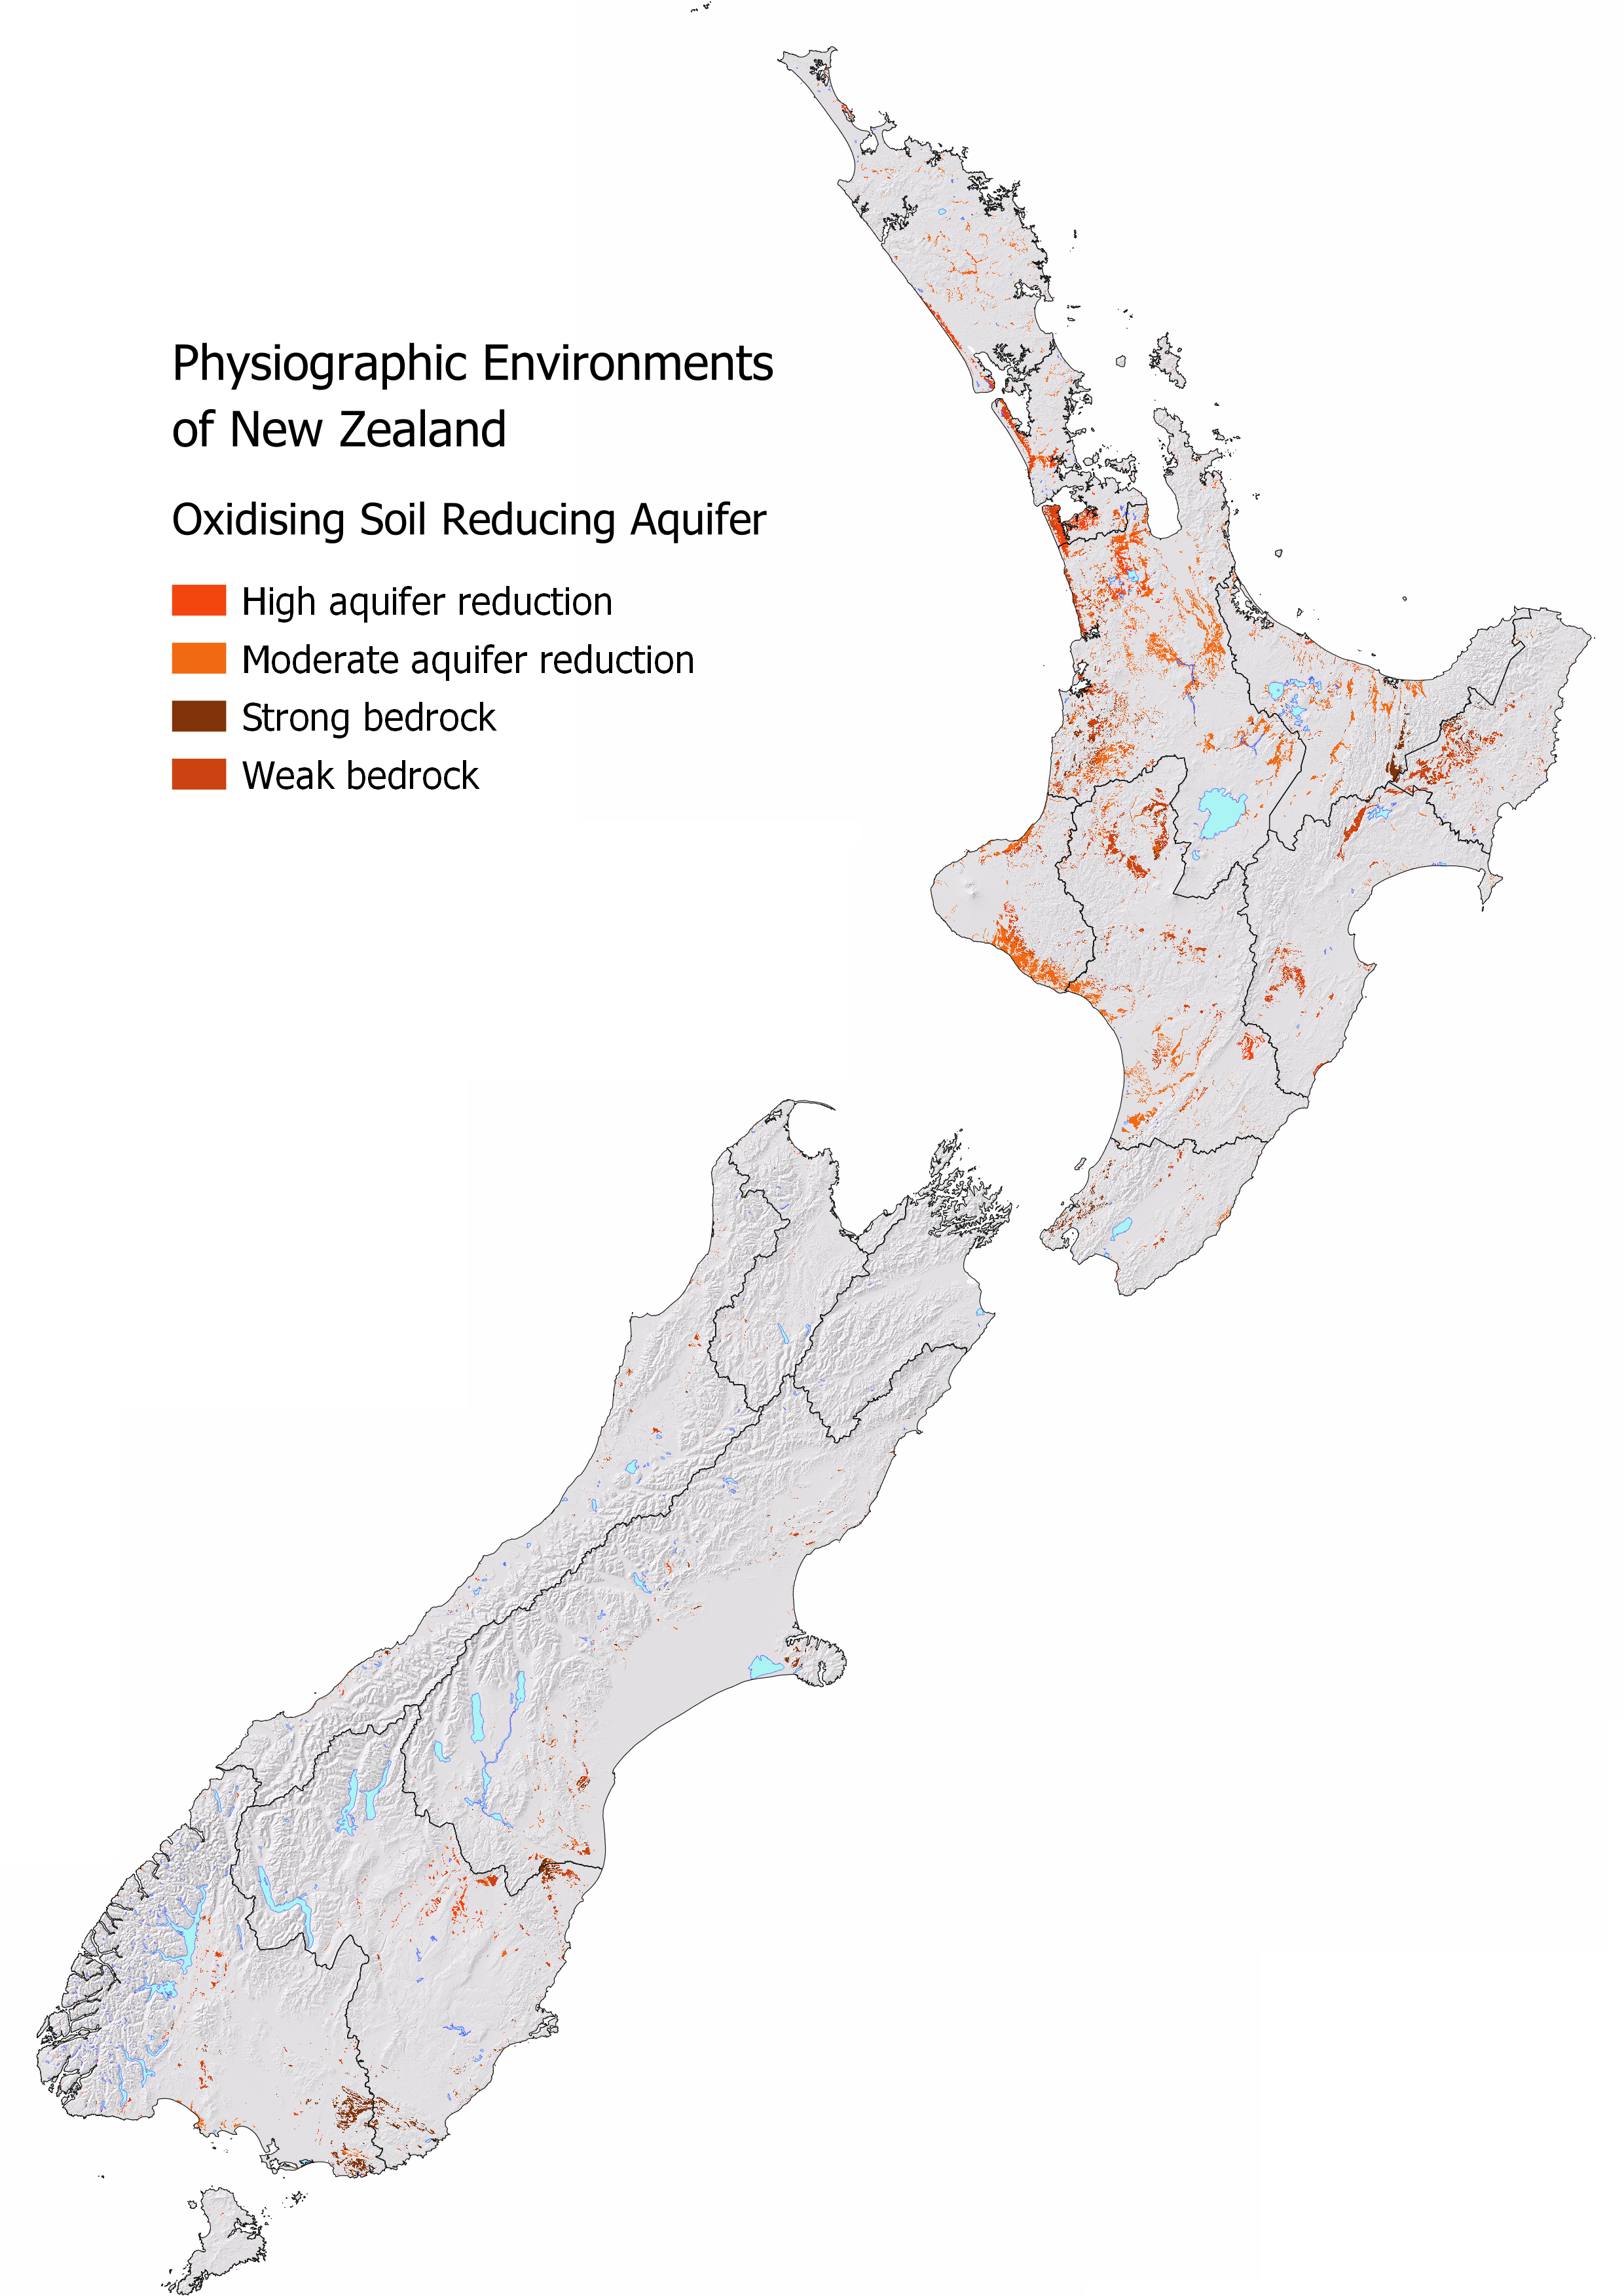 slope map of new zealand with the parts classified as 'Oxidising Soil over Reducing Aquifer' showing.